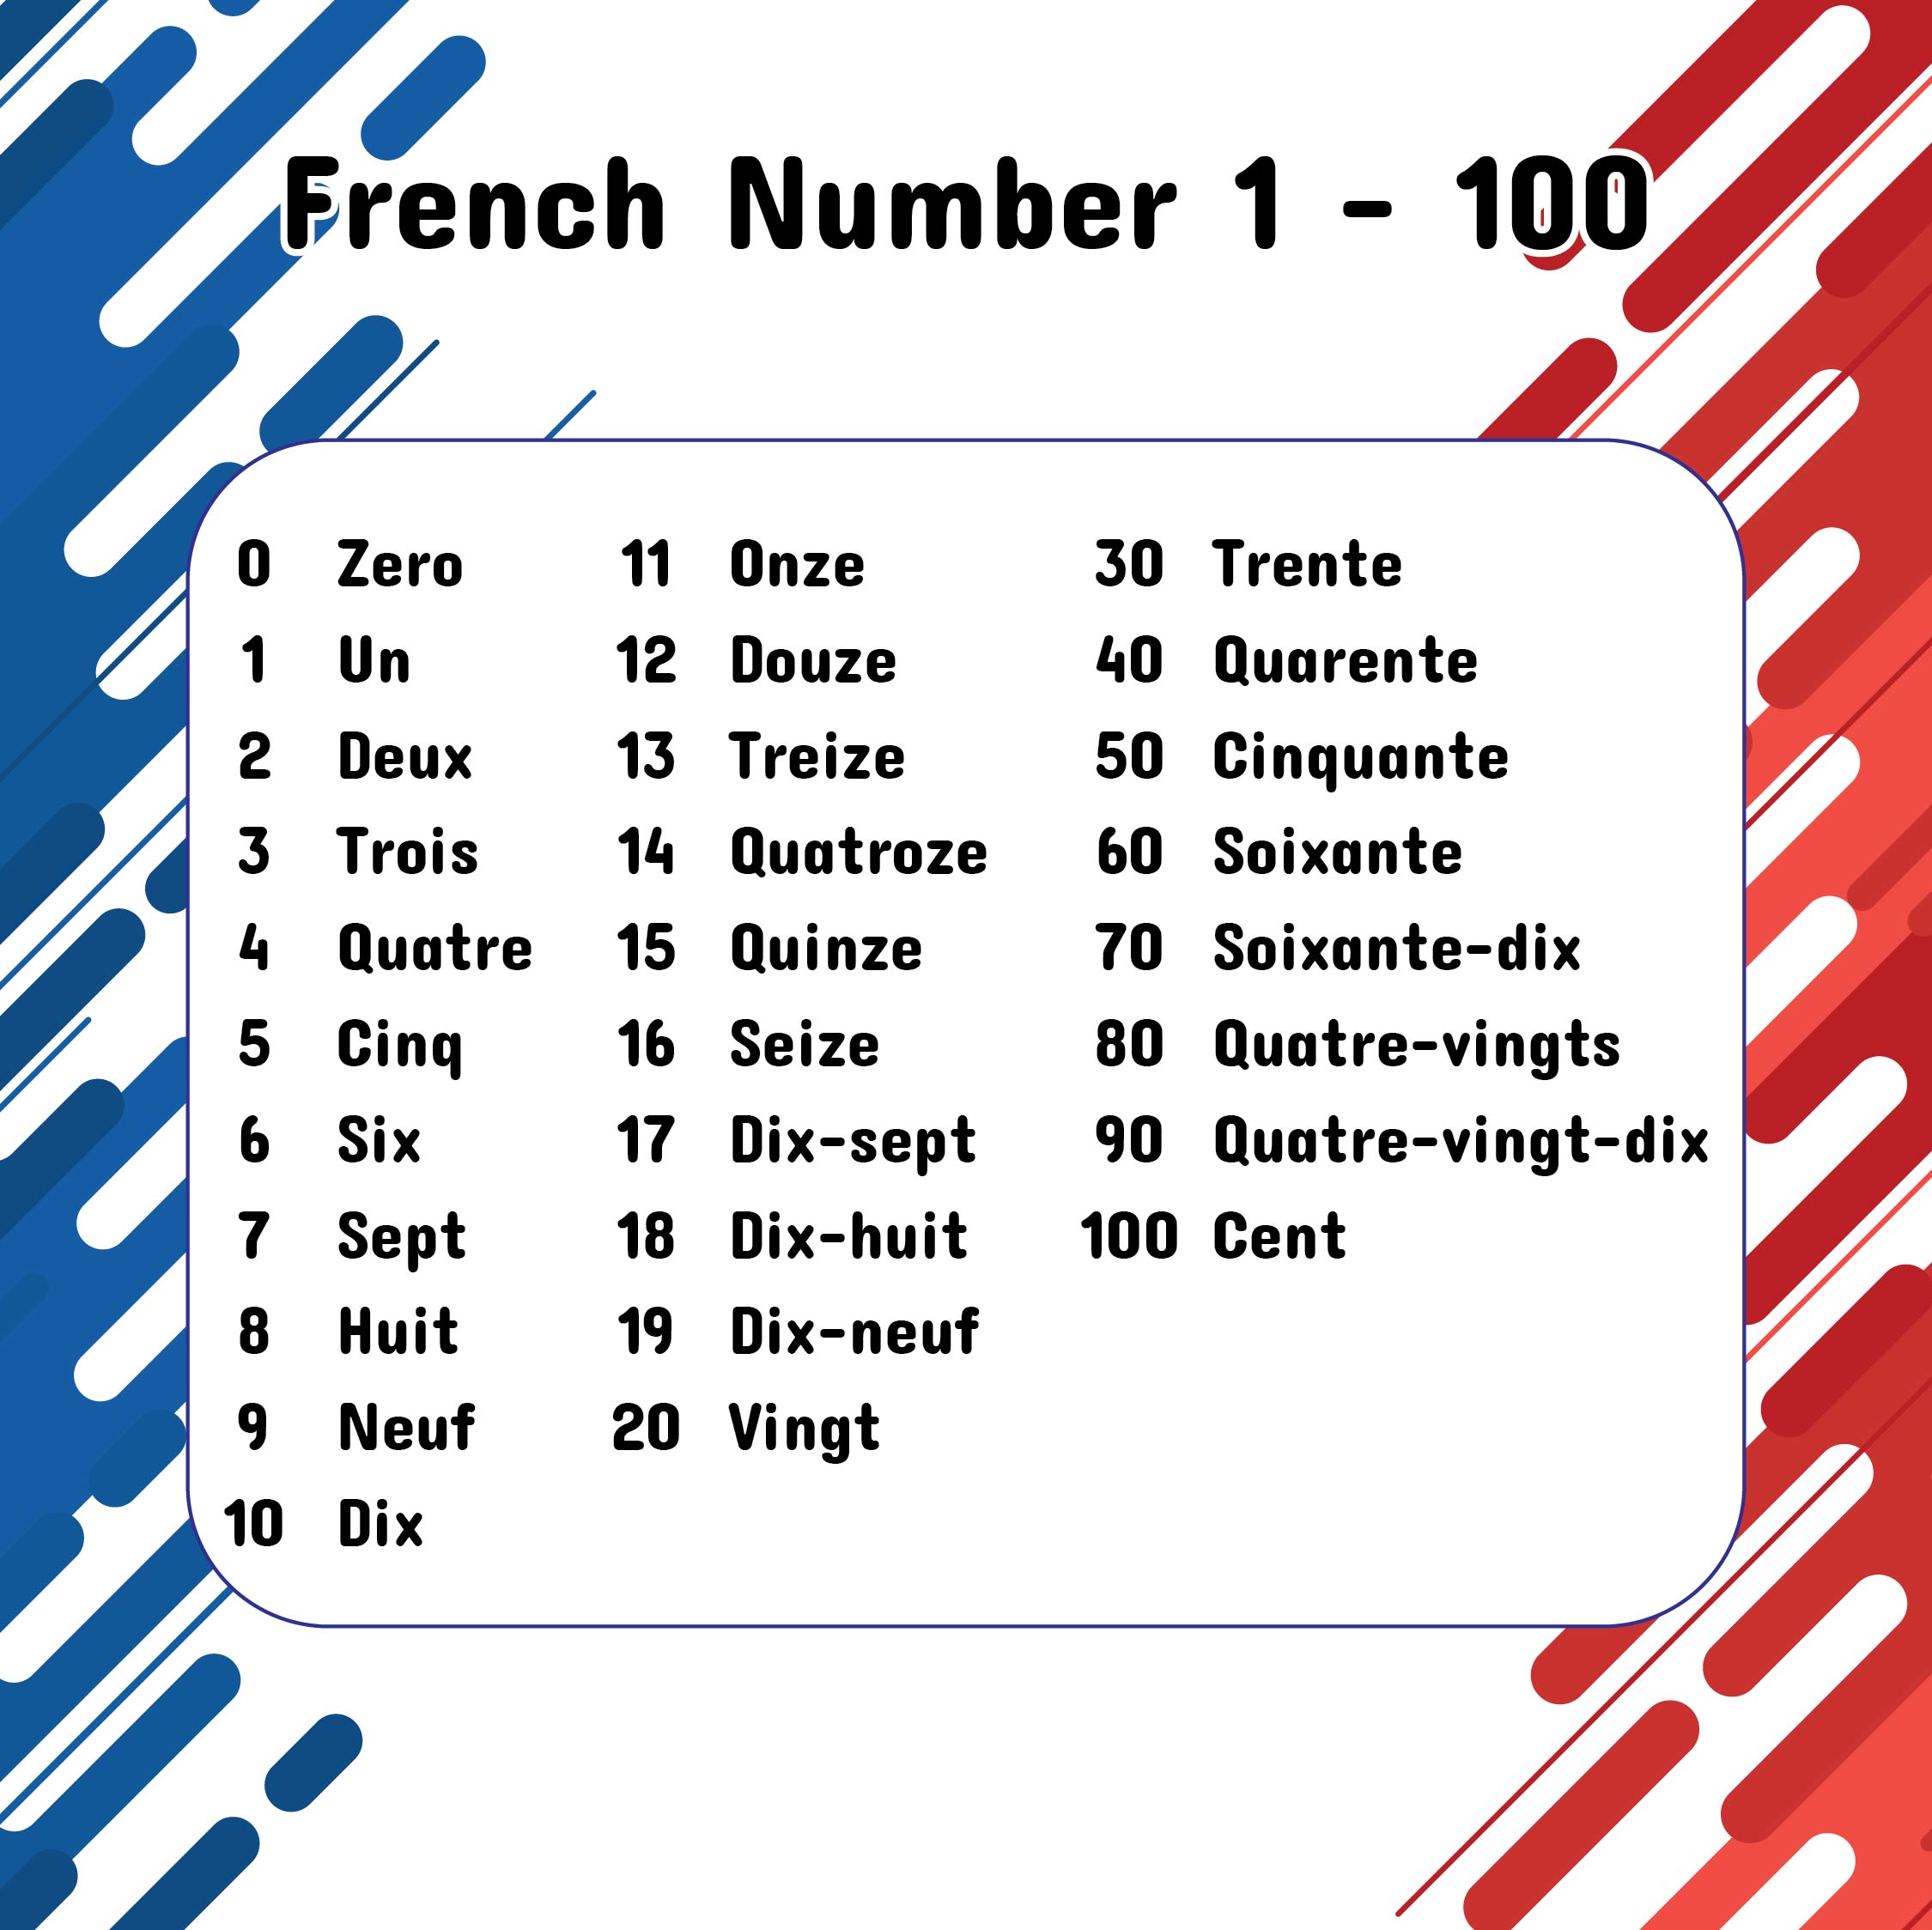 french numbers 1 30